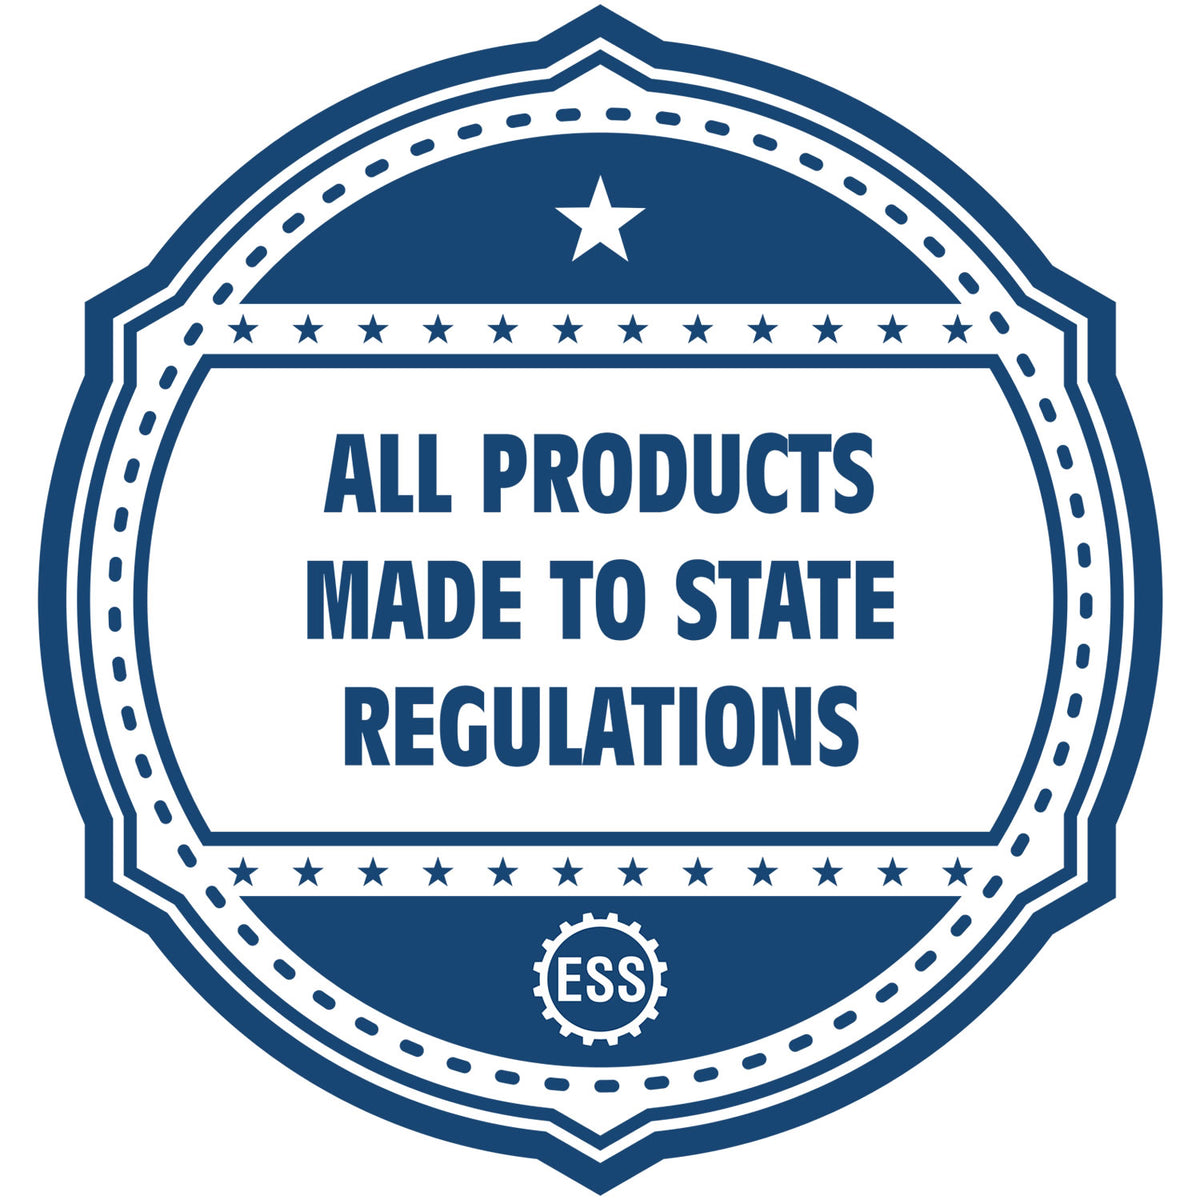 An icon or badge element for the Digital Arkansas Landscape Architect Stamp showing that this product is made in compliance with state regulations.